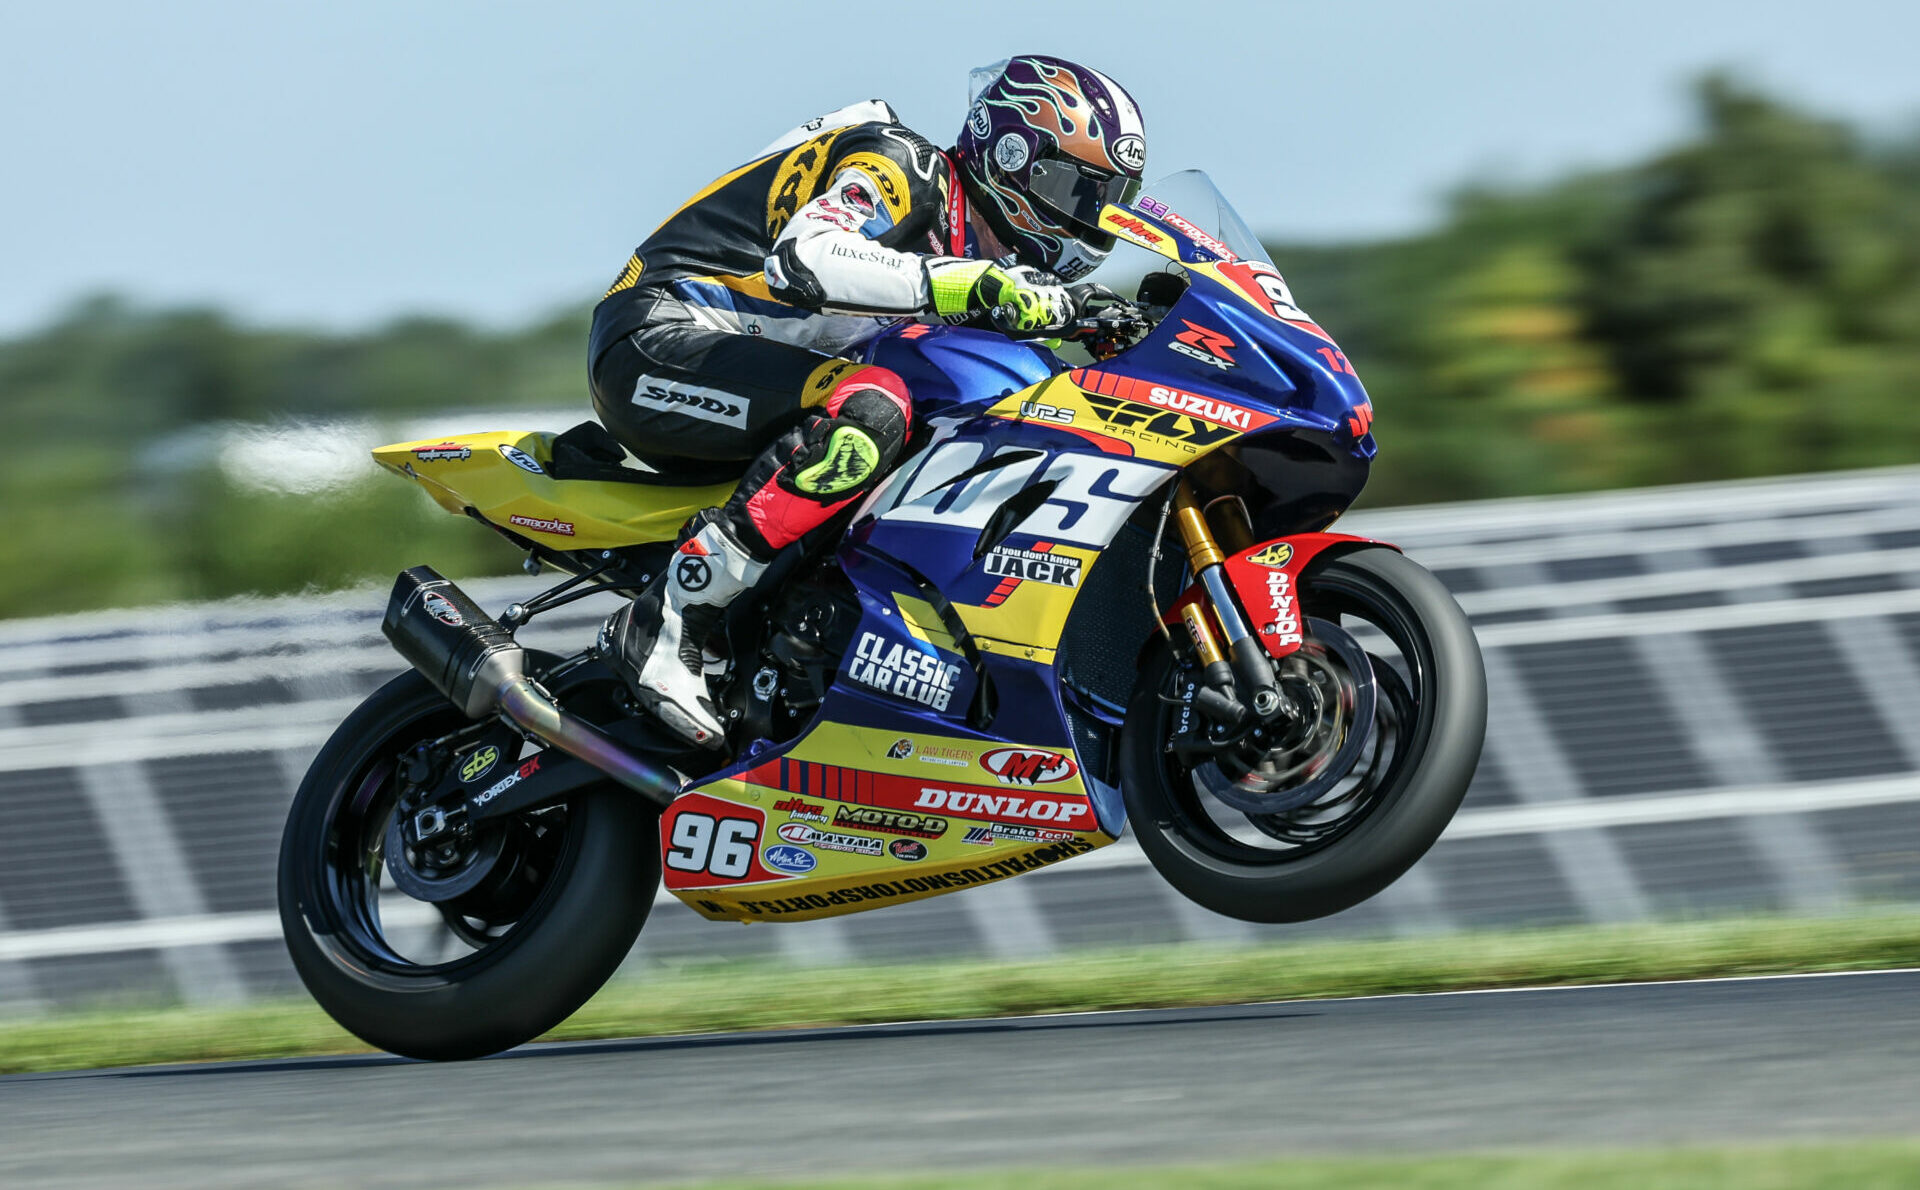 Brandon Paasch (96) in action at New Jersey Motorsports Park in 2022. Photo by Brian J. Nelson.